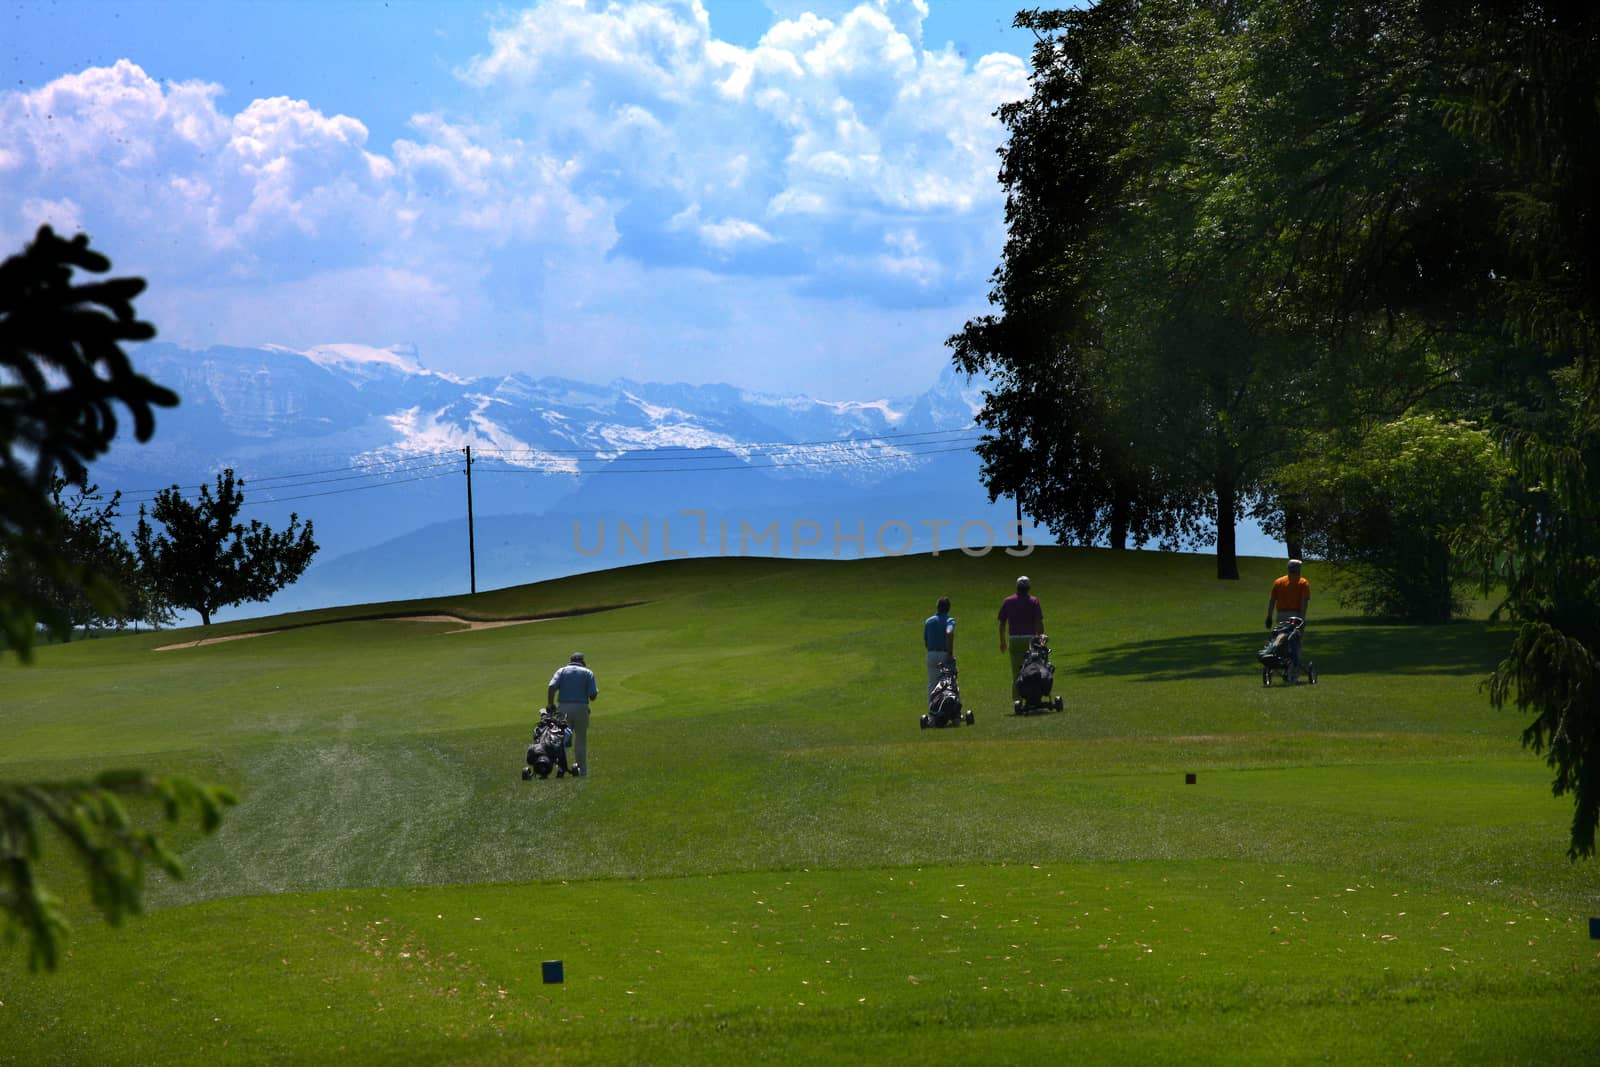 golf sport on a gold course in Switzerland with green grass and blue sky